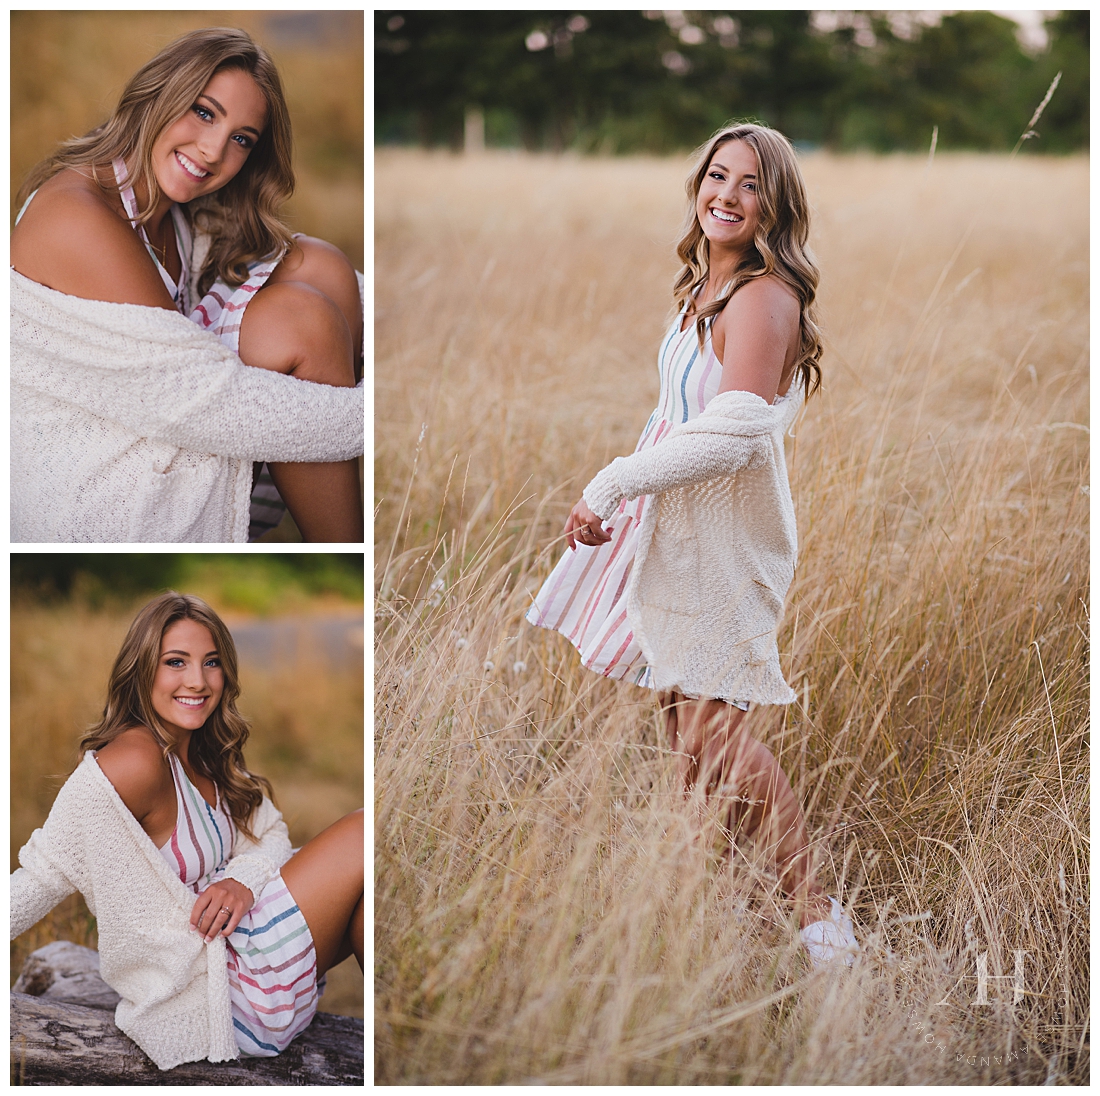 Rustic Senior Portraits in a Tall, Grassy Field | Photographed by the Best Tacoma Senior Photographer Amanda Howse